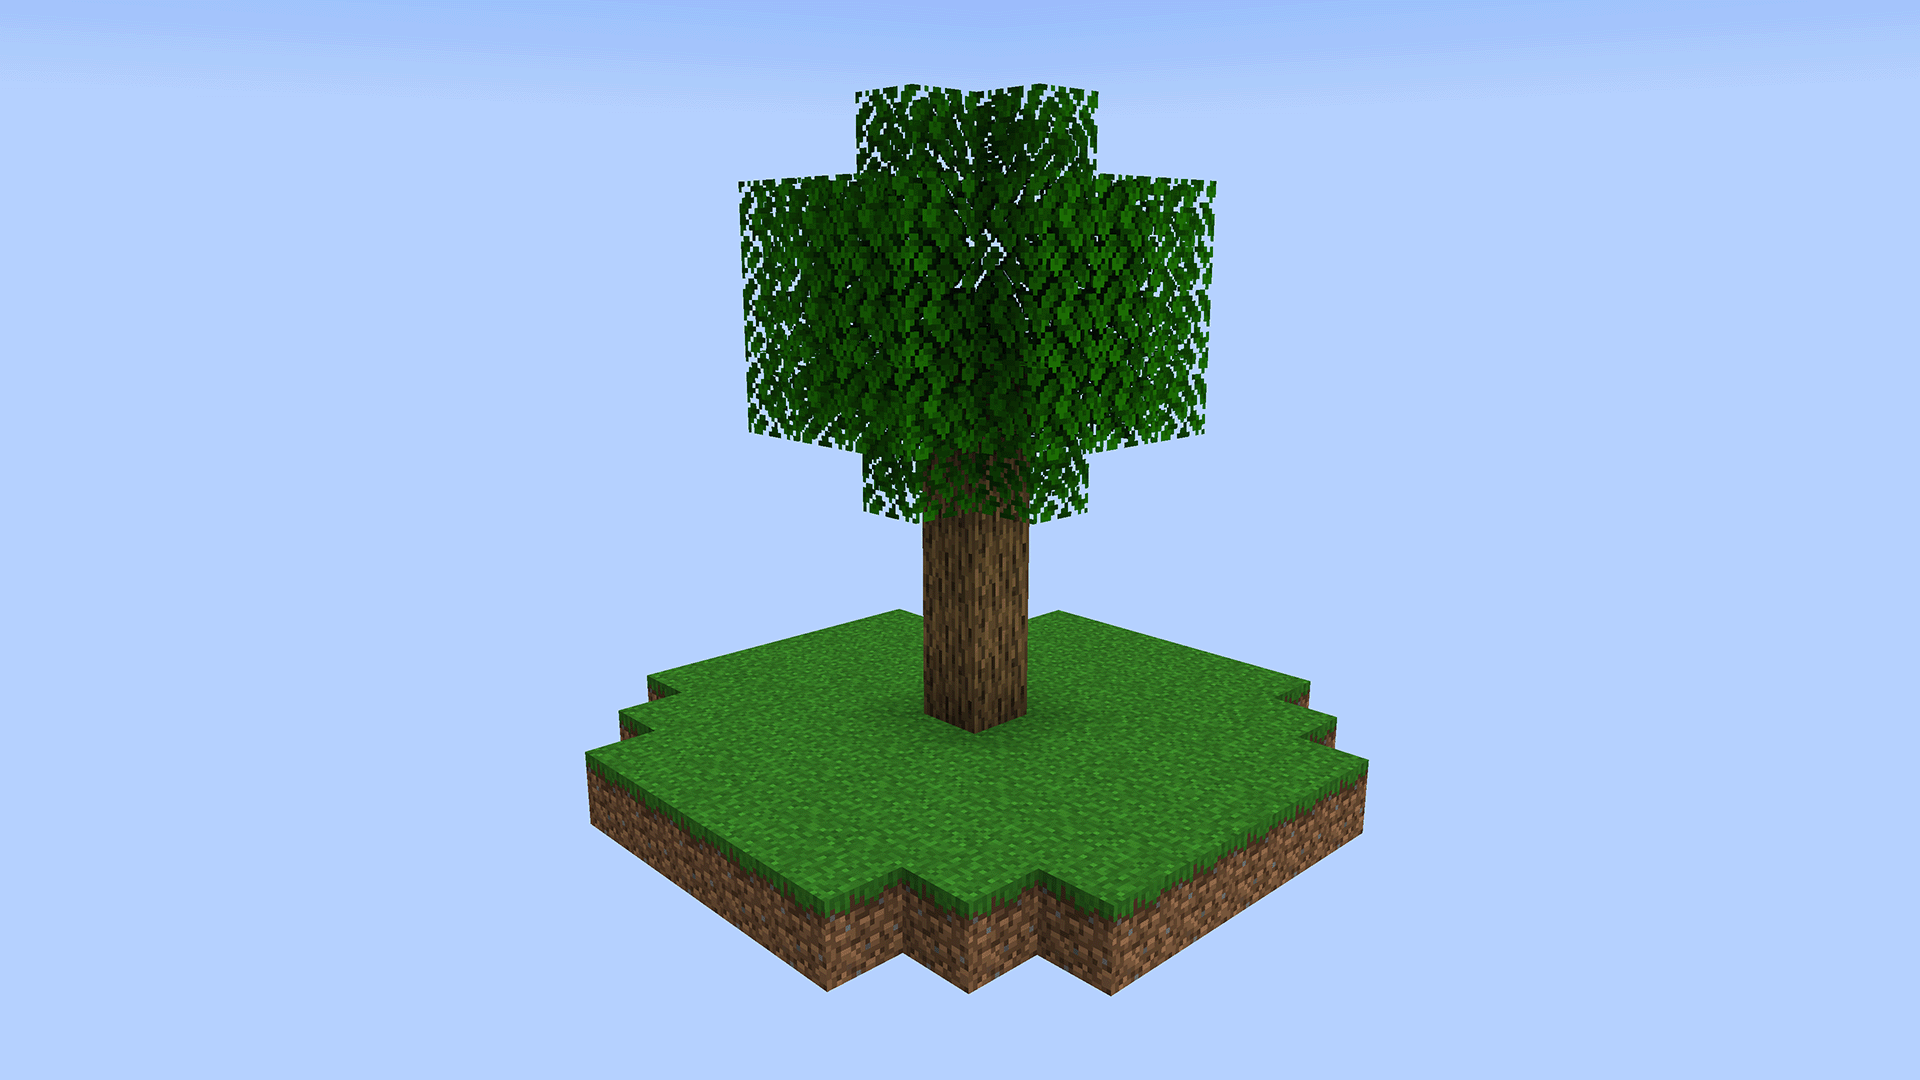 small spawn platform with grass, both types of nylium, and a tree